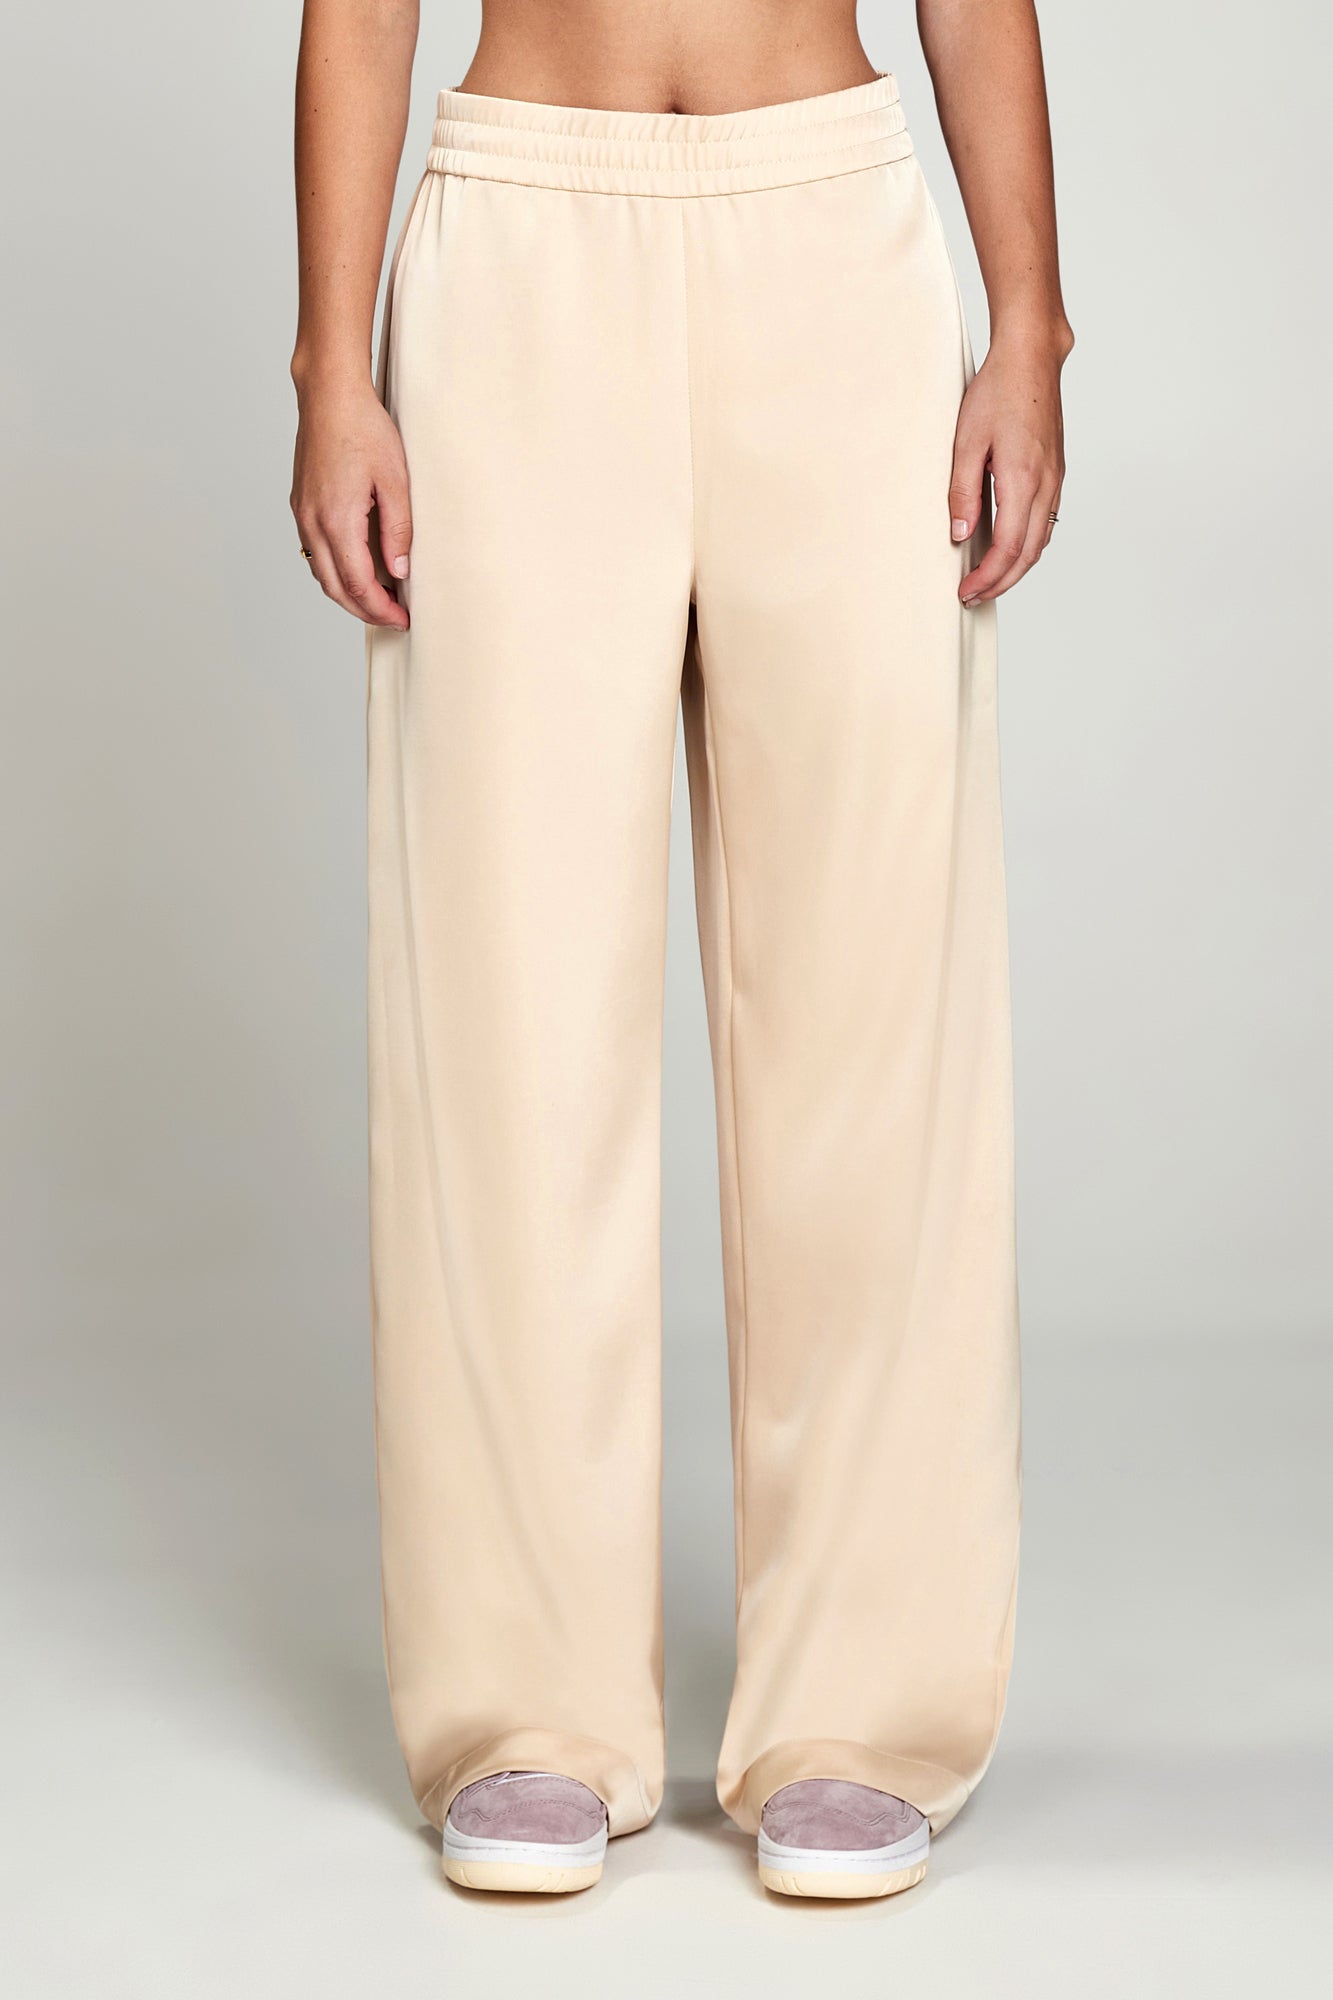 Skinny pants bicolor with magic waistband - 60524 - ShopperBoard